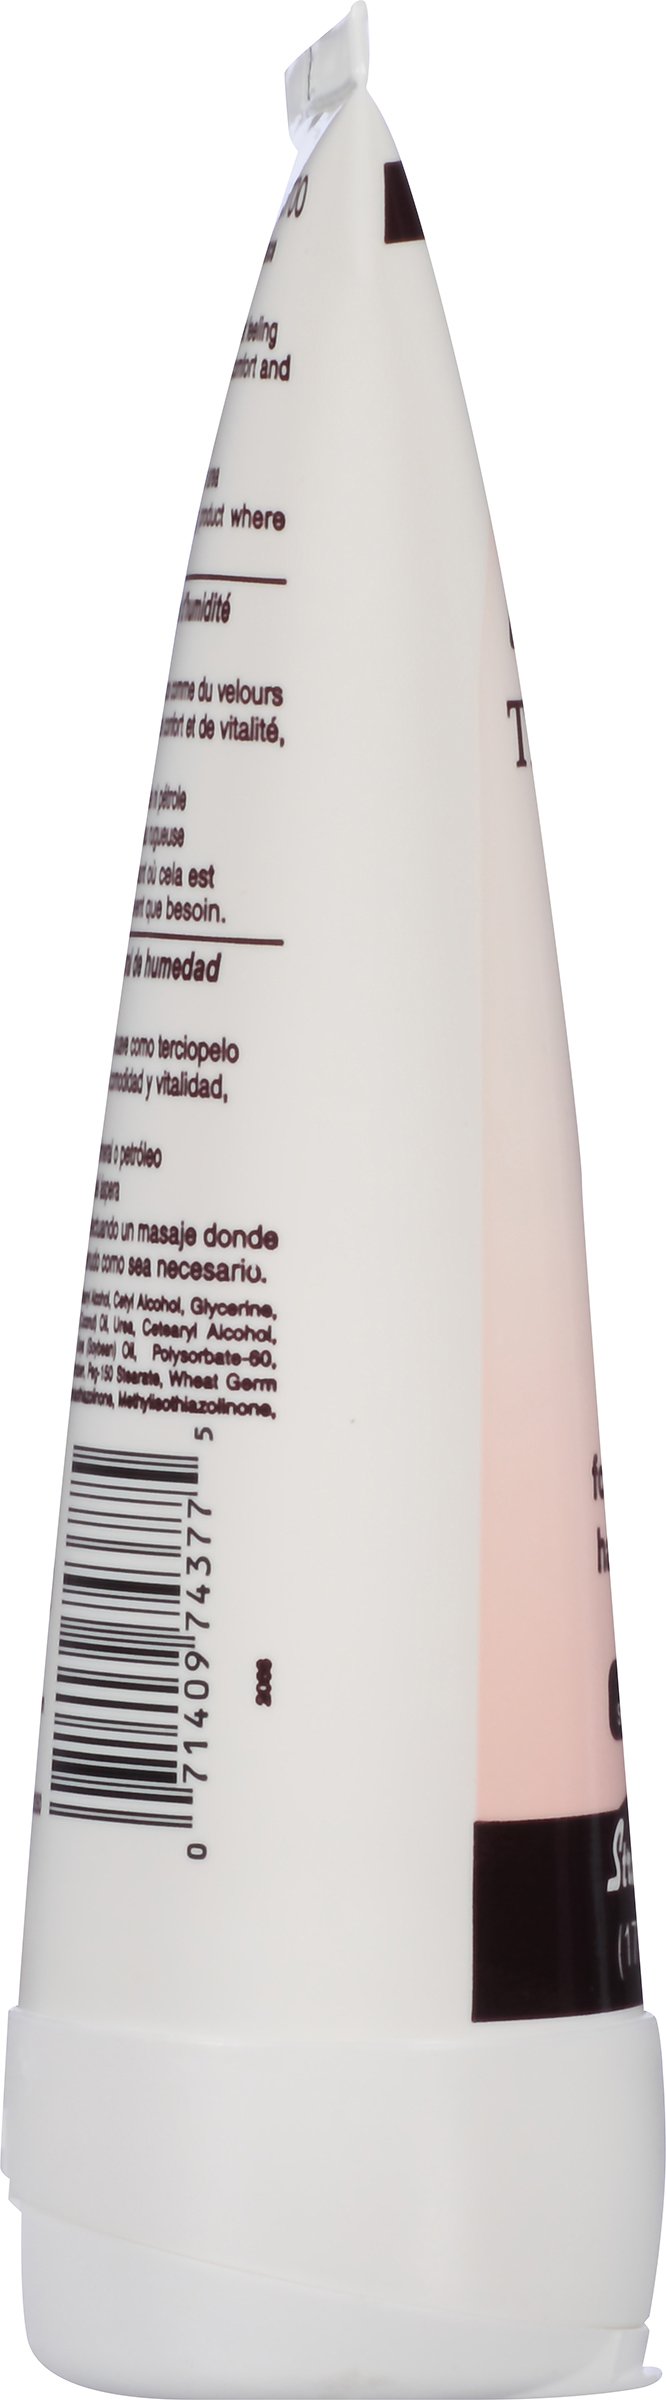 Foot Moisturizer Foot Miracle 6 oz. Tube Scented Cream